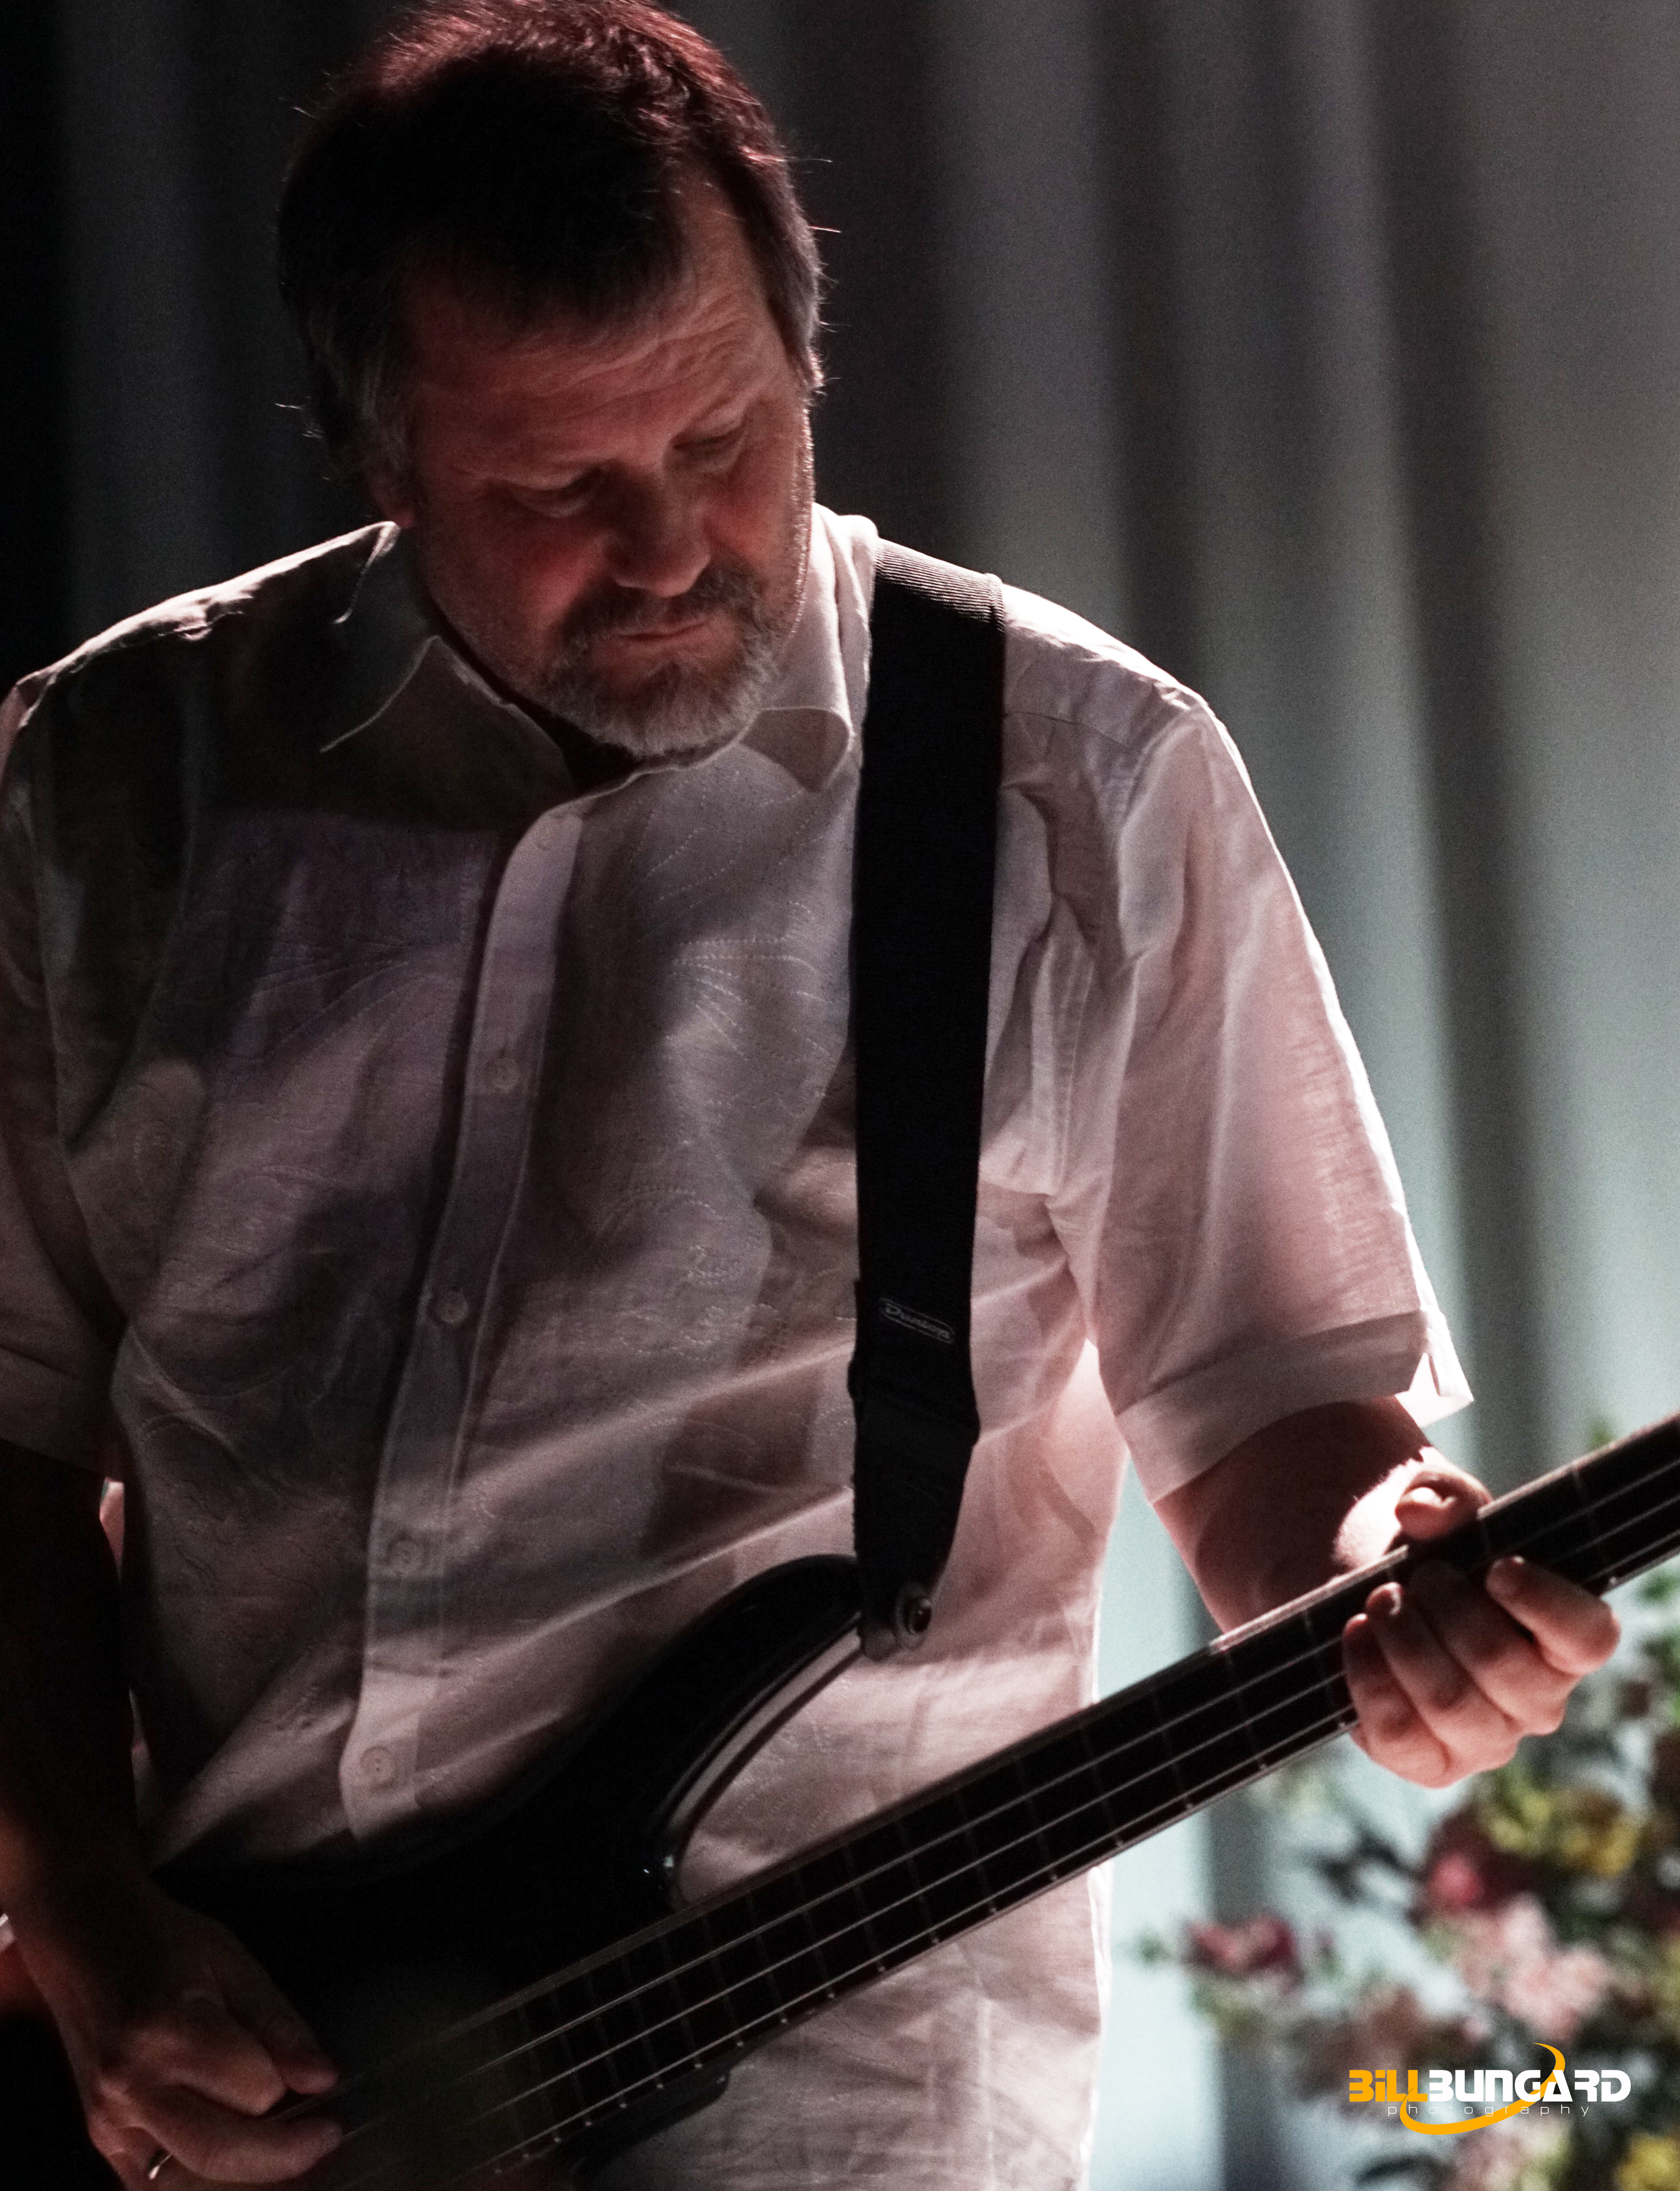 Billy Gould of Faith No More at The Paramount (Photo by Bill Bungard)